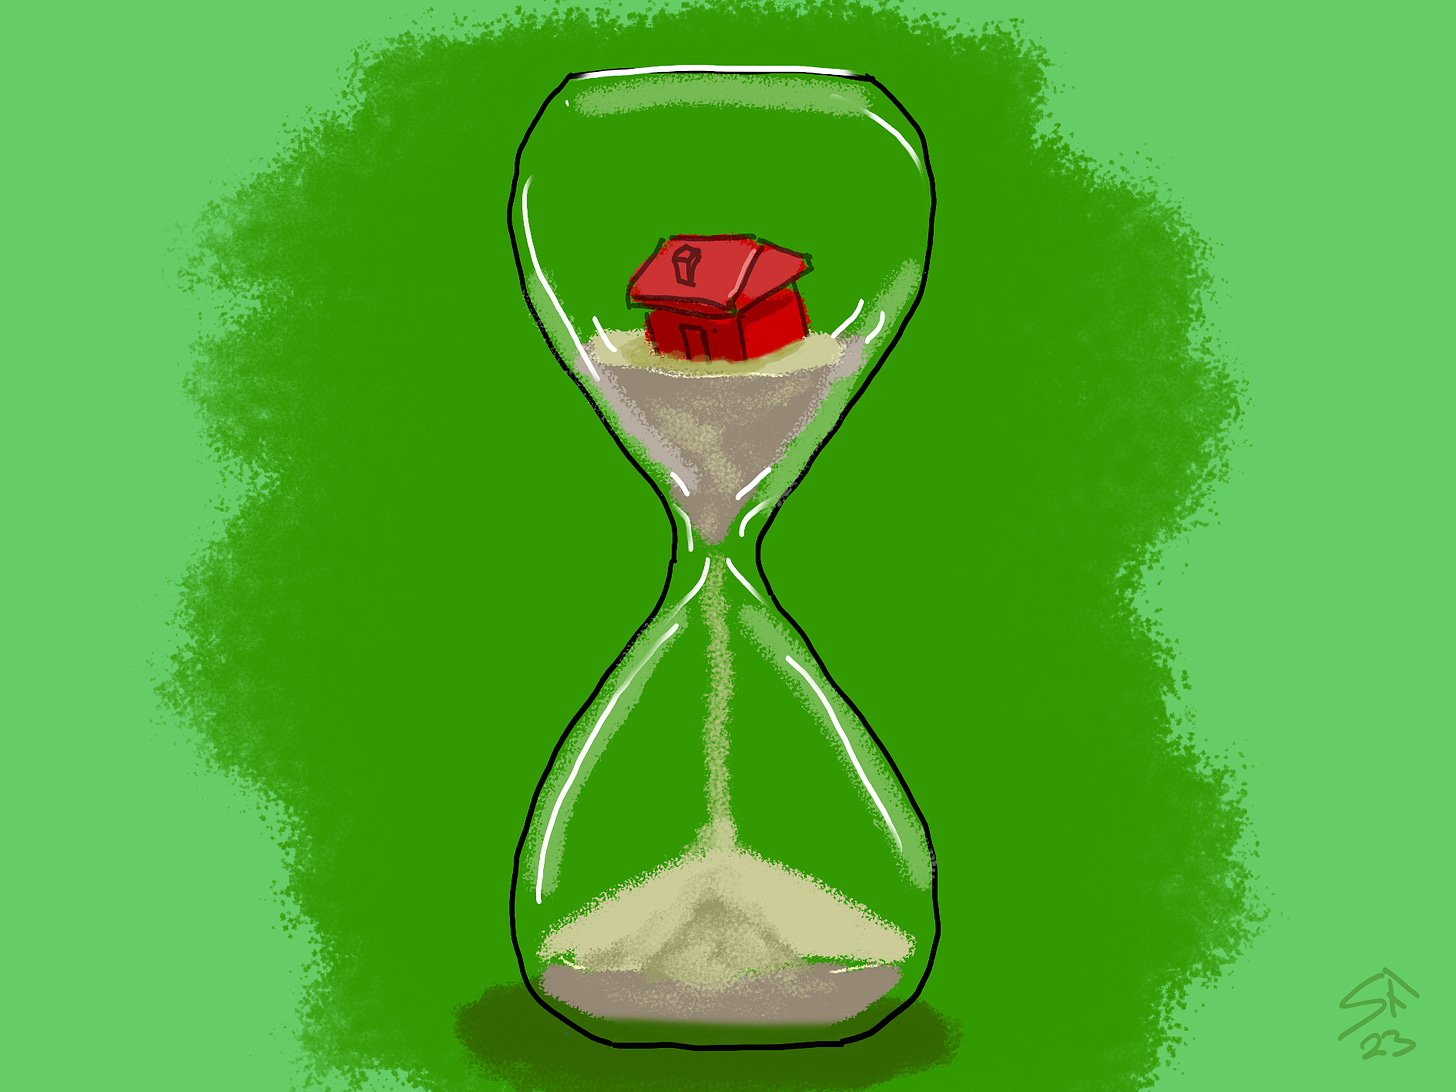 A cartoon hourglass, with sand running through. In the top half, a small red house, like a Monopoly piece, is falling into the neck.